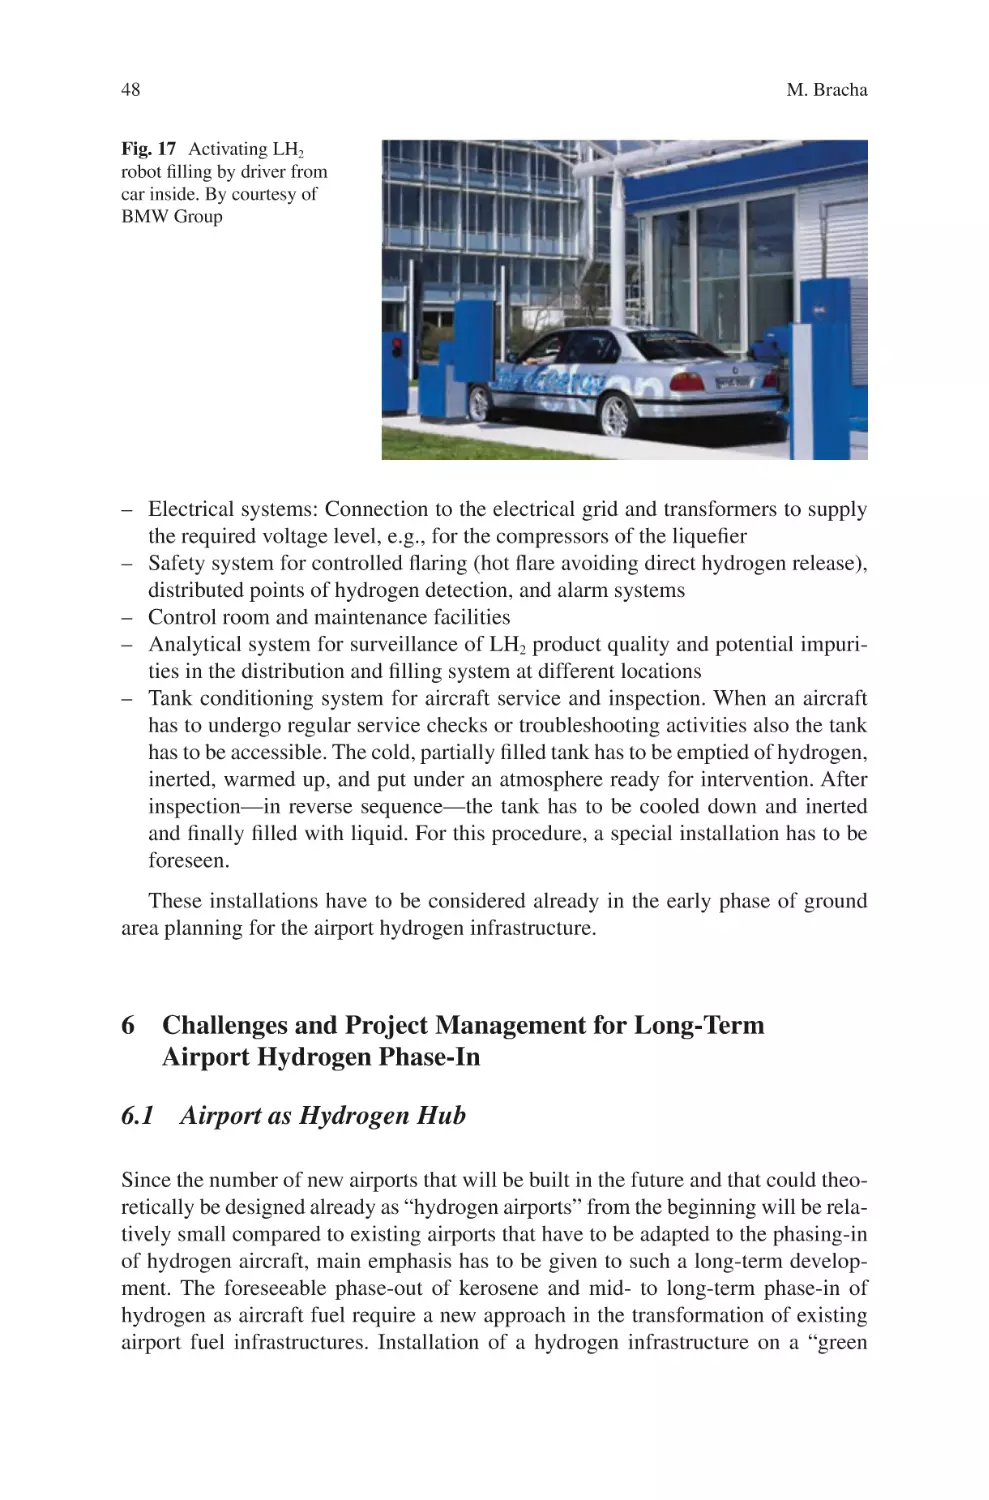 6 Challenges and Project Management for Long-Term Airport Hydrogen Phase-In
6.1 Airport as Hydrogen Hub